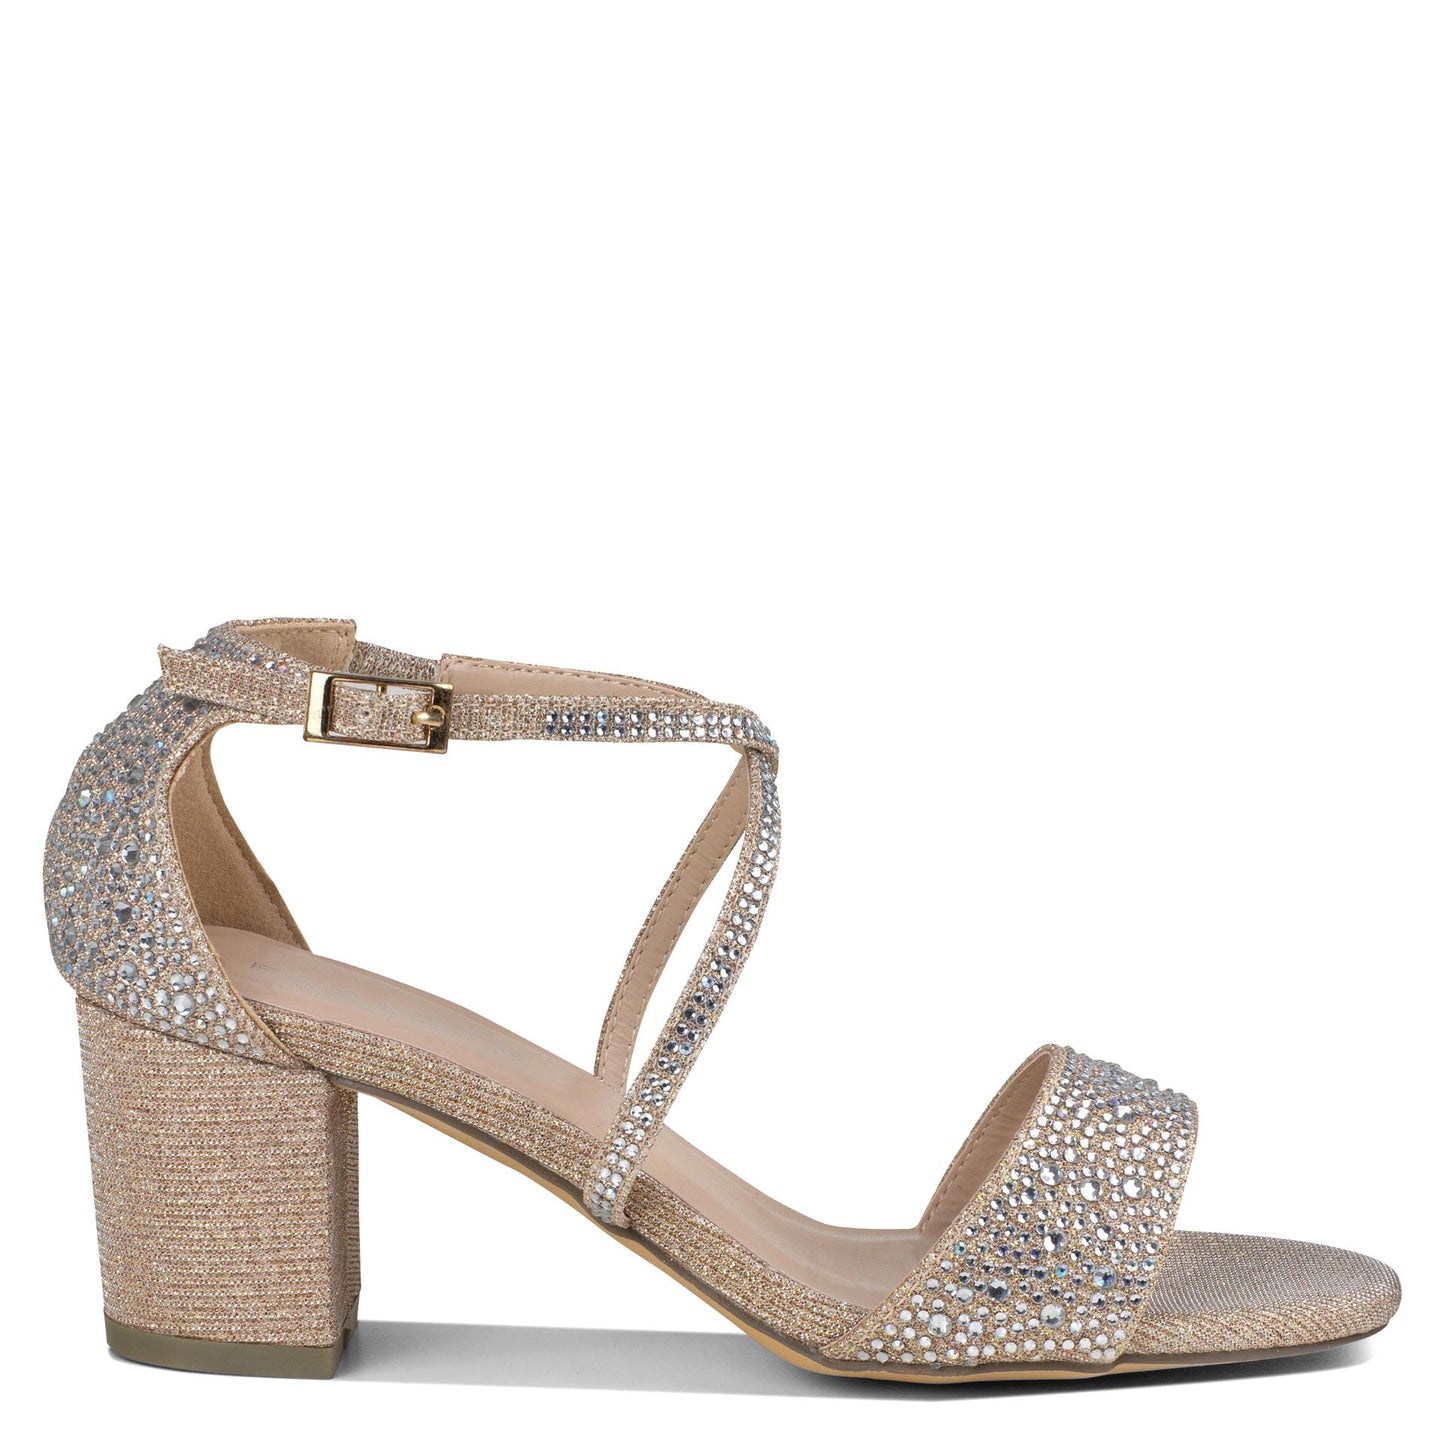 Side view of Metallic champage and rhinestone shoe with 2" block heel and criss cross straps